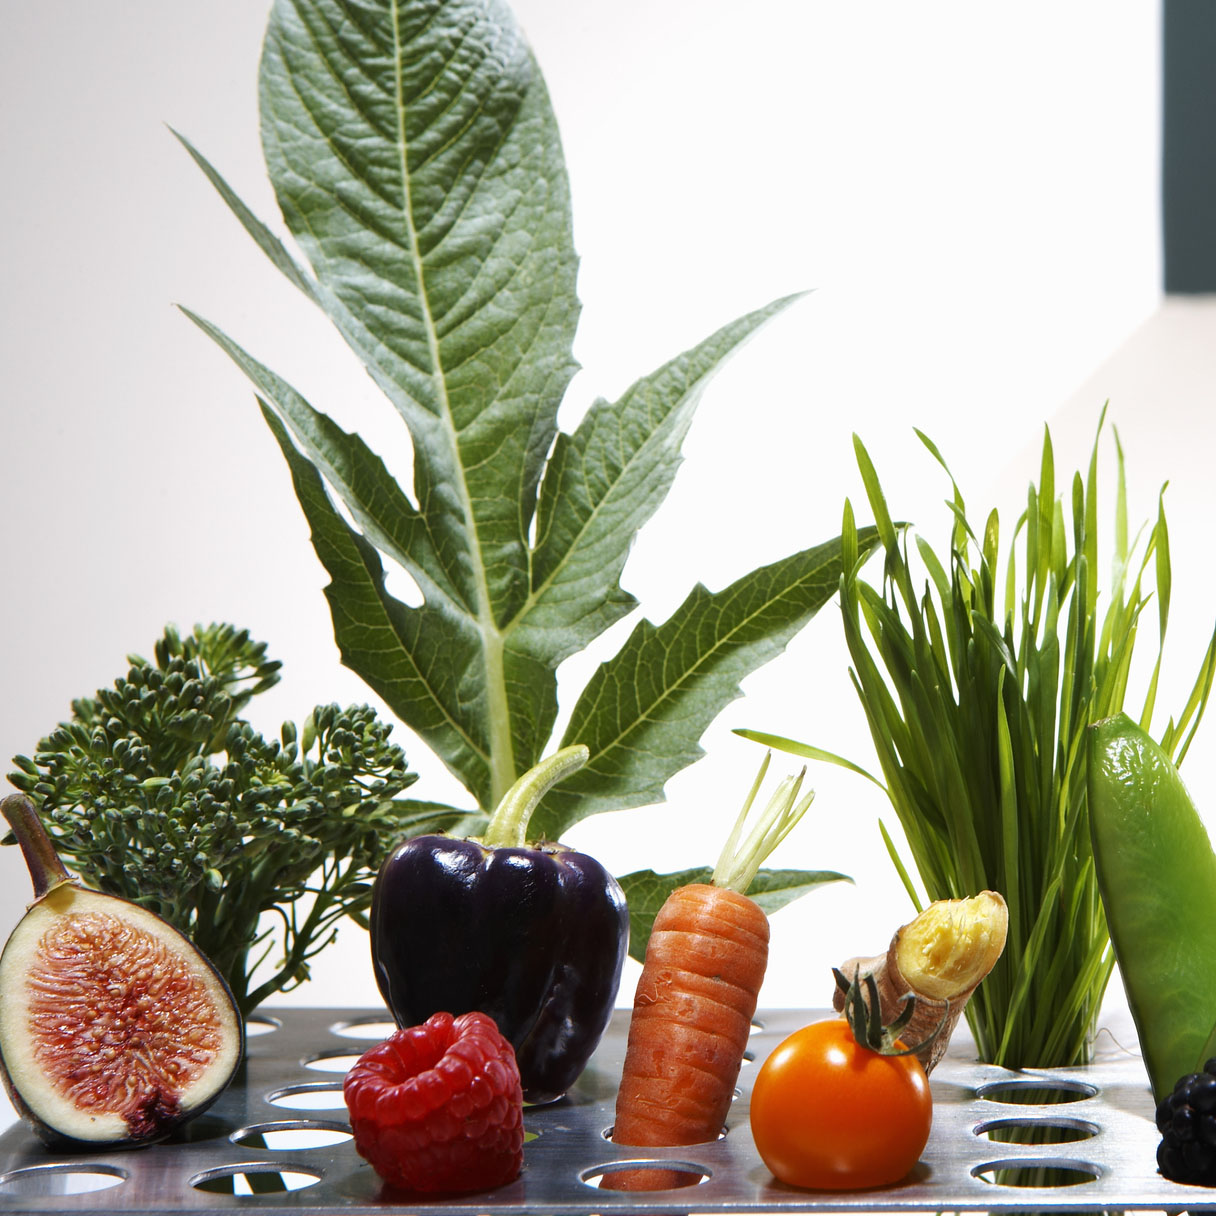 Test tube holder with different vegetables and fruits, studio shot 